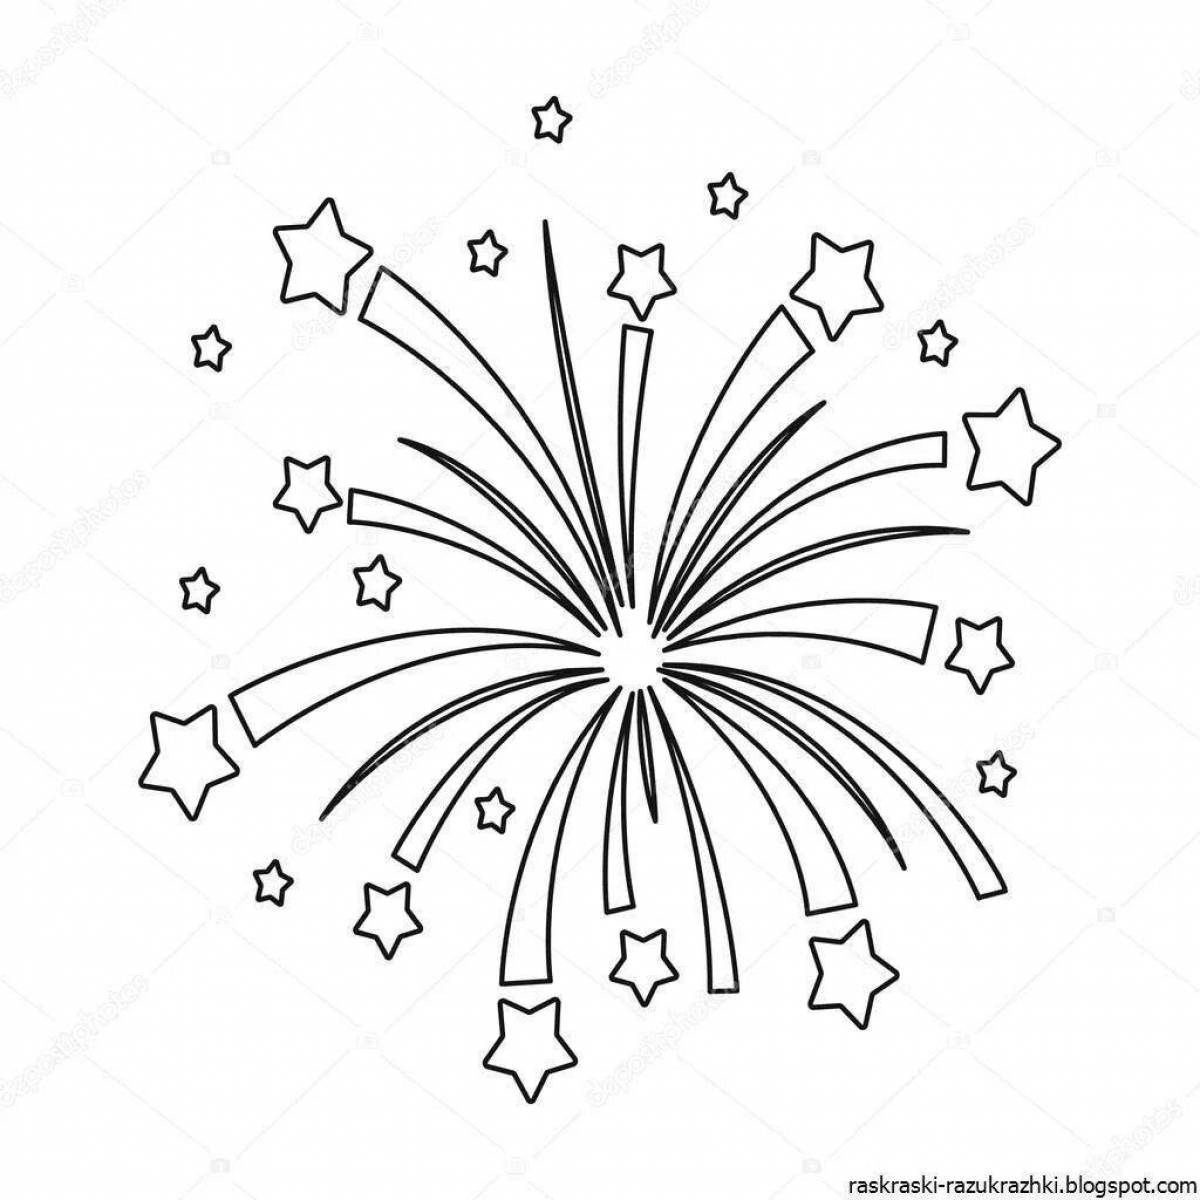 Color-frenzy salute coloring page for children 3-4 years old